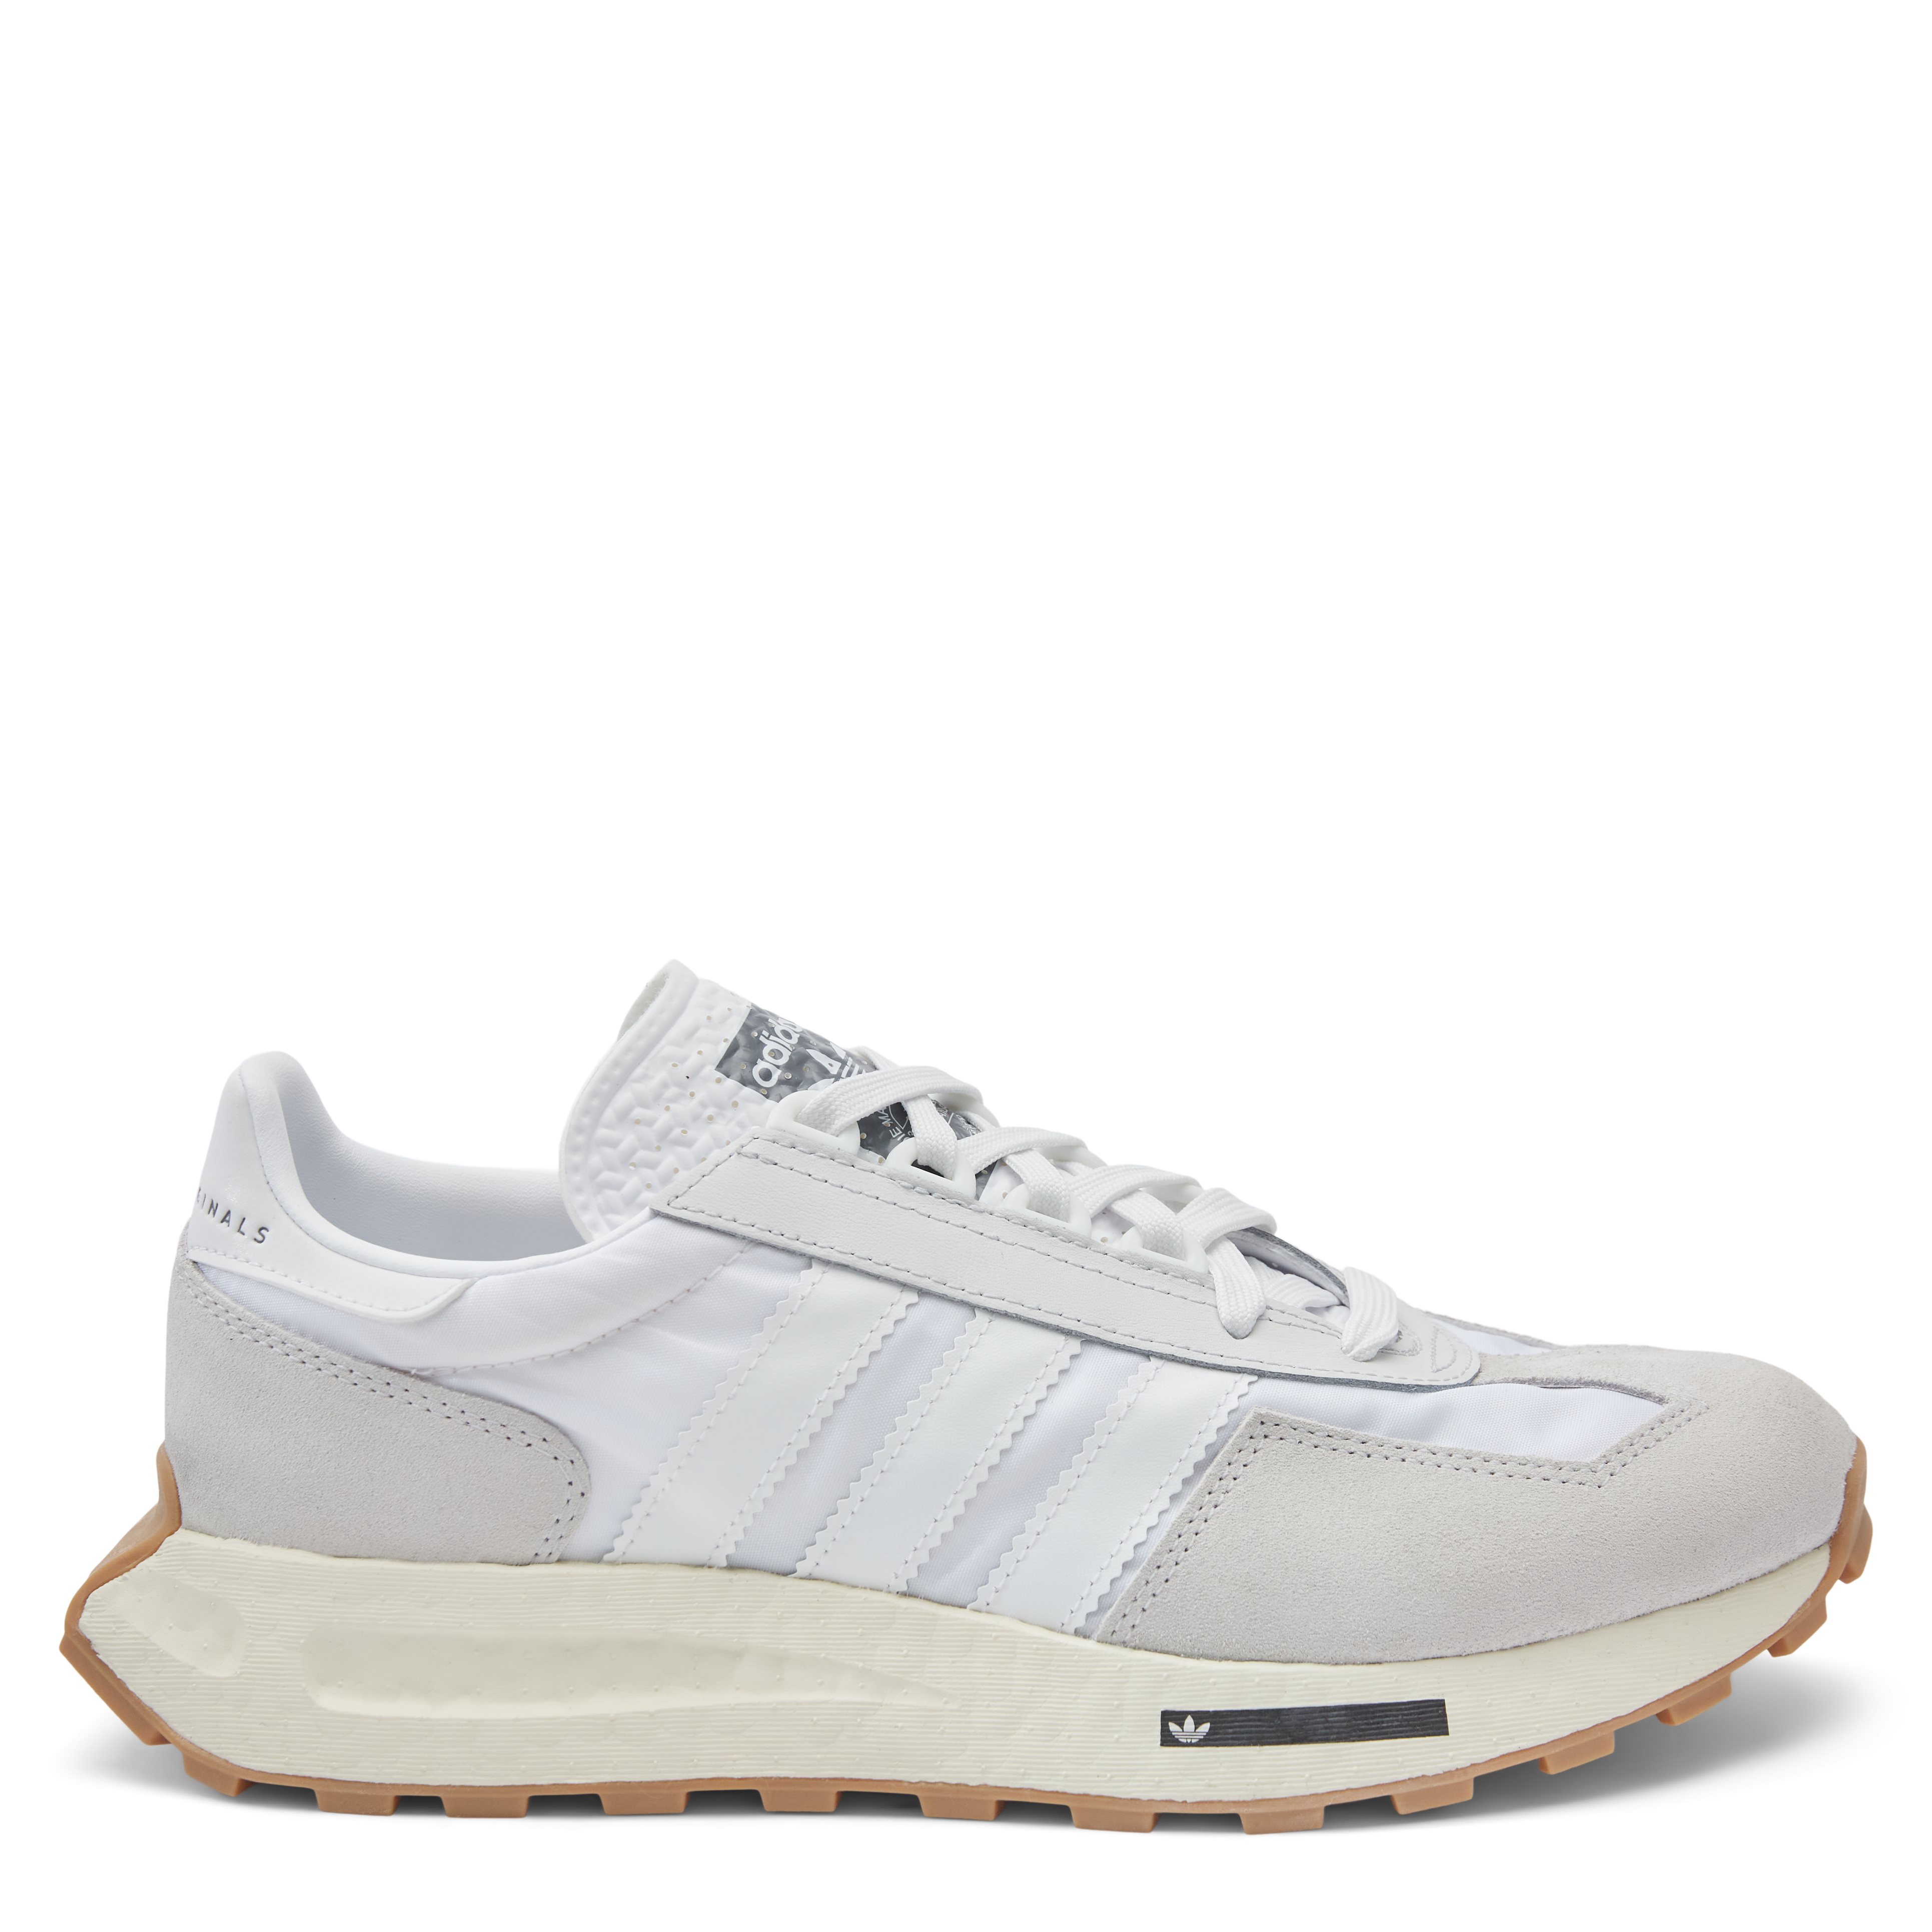 Retropy Sneakers - Shoes - White